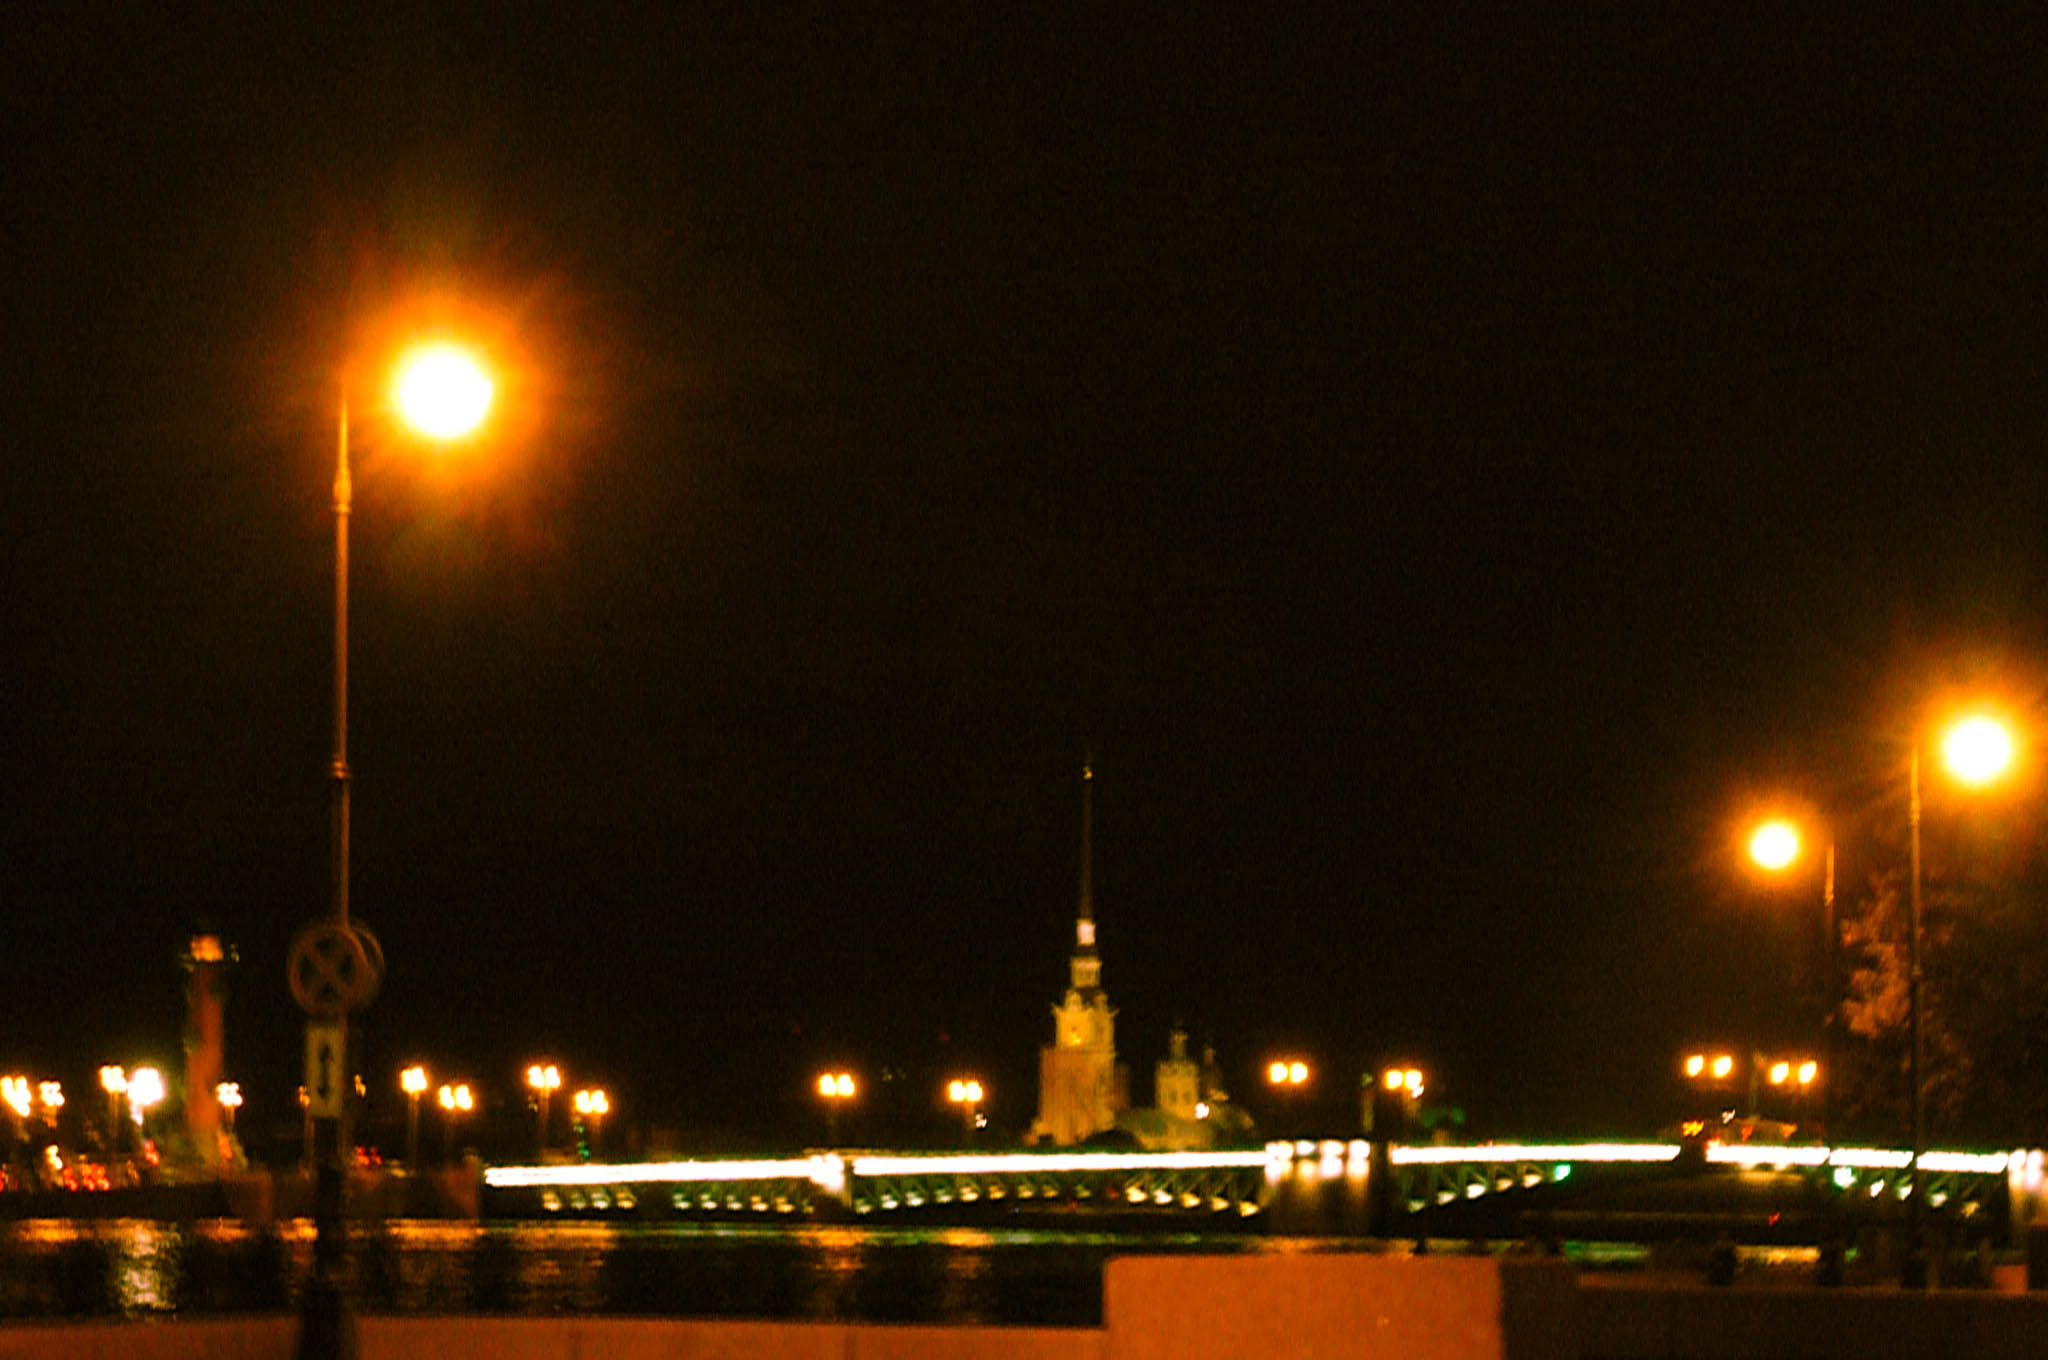 Sight to the Peter and Paul Cathedral (Saint-Petersburg) [Alexander Shemetev]